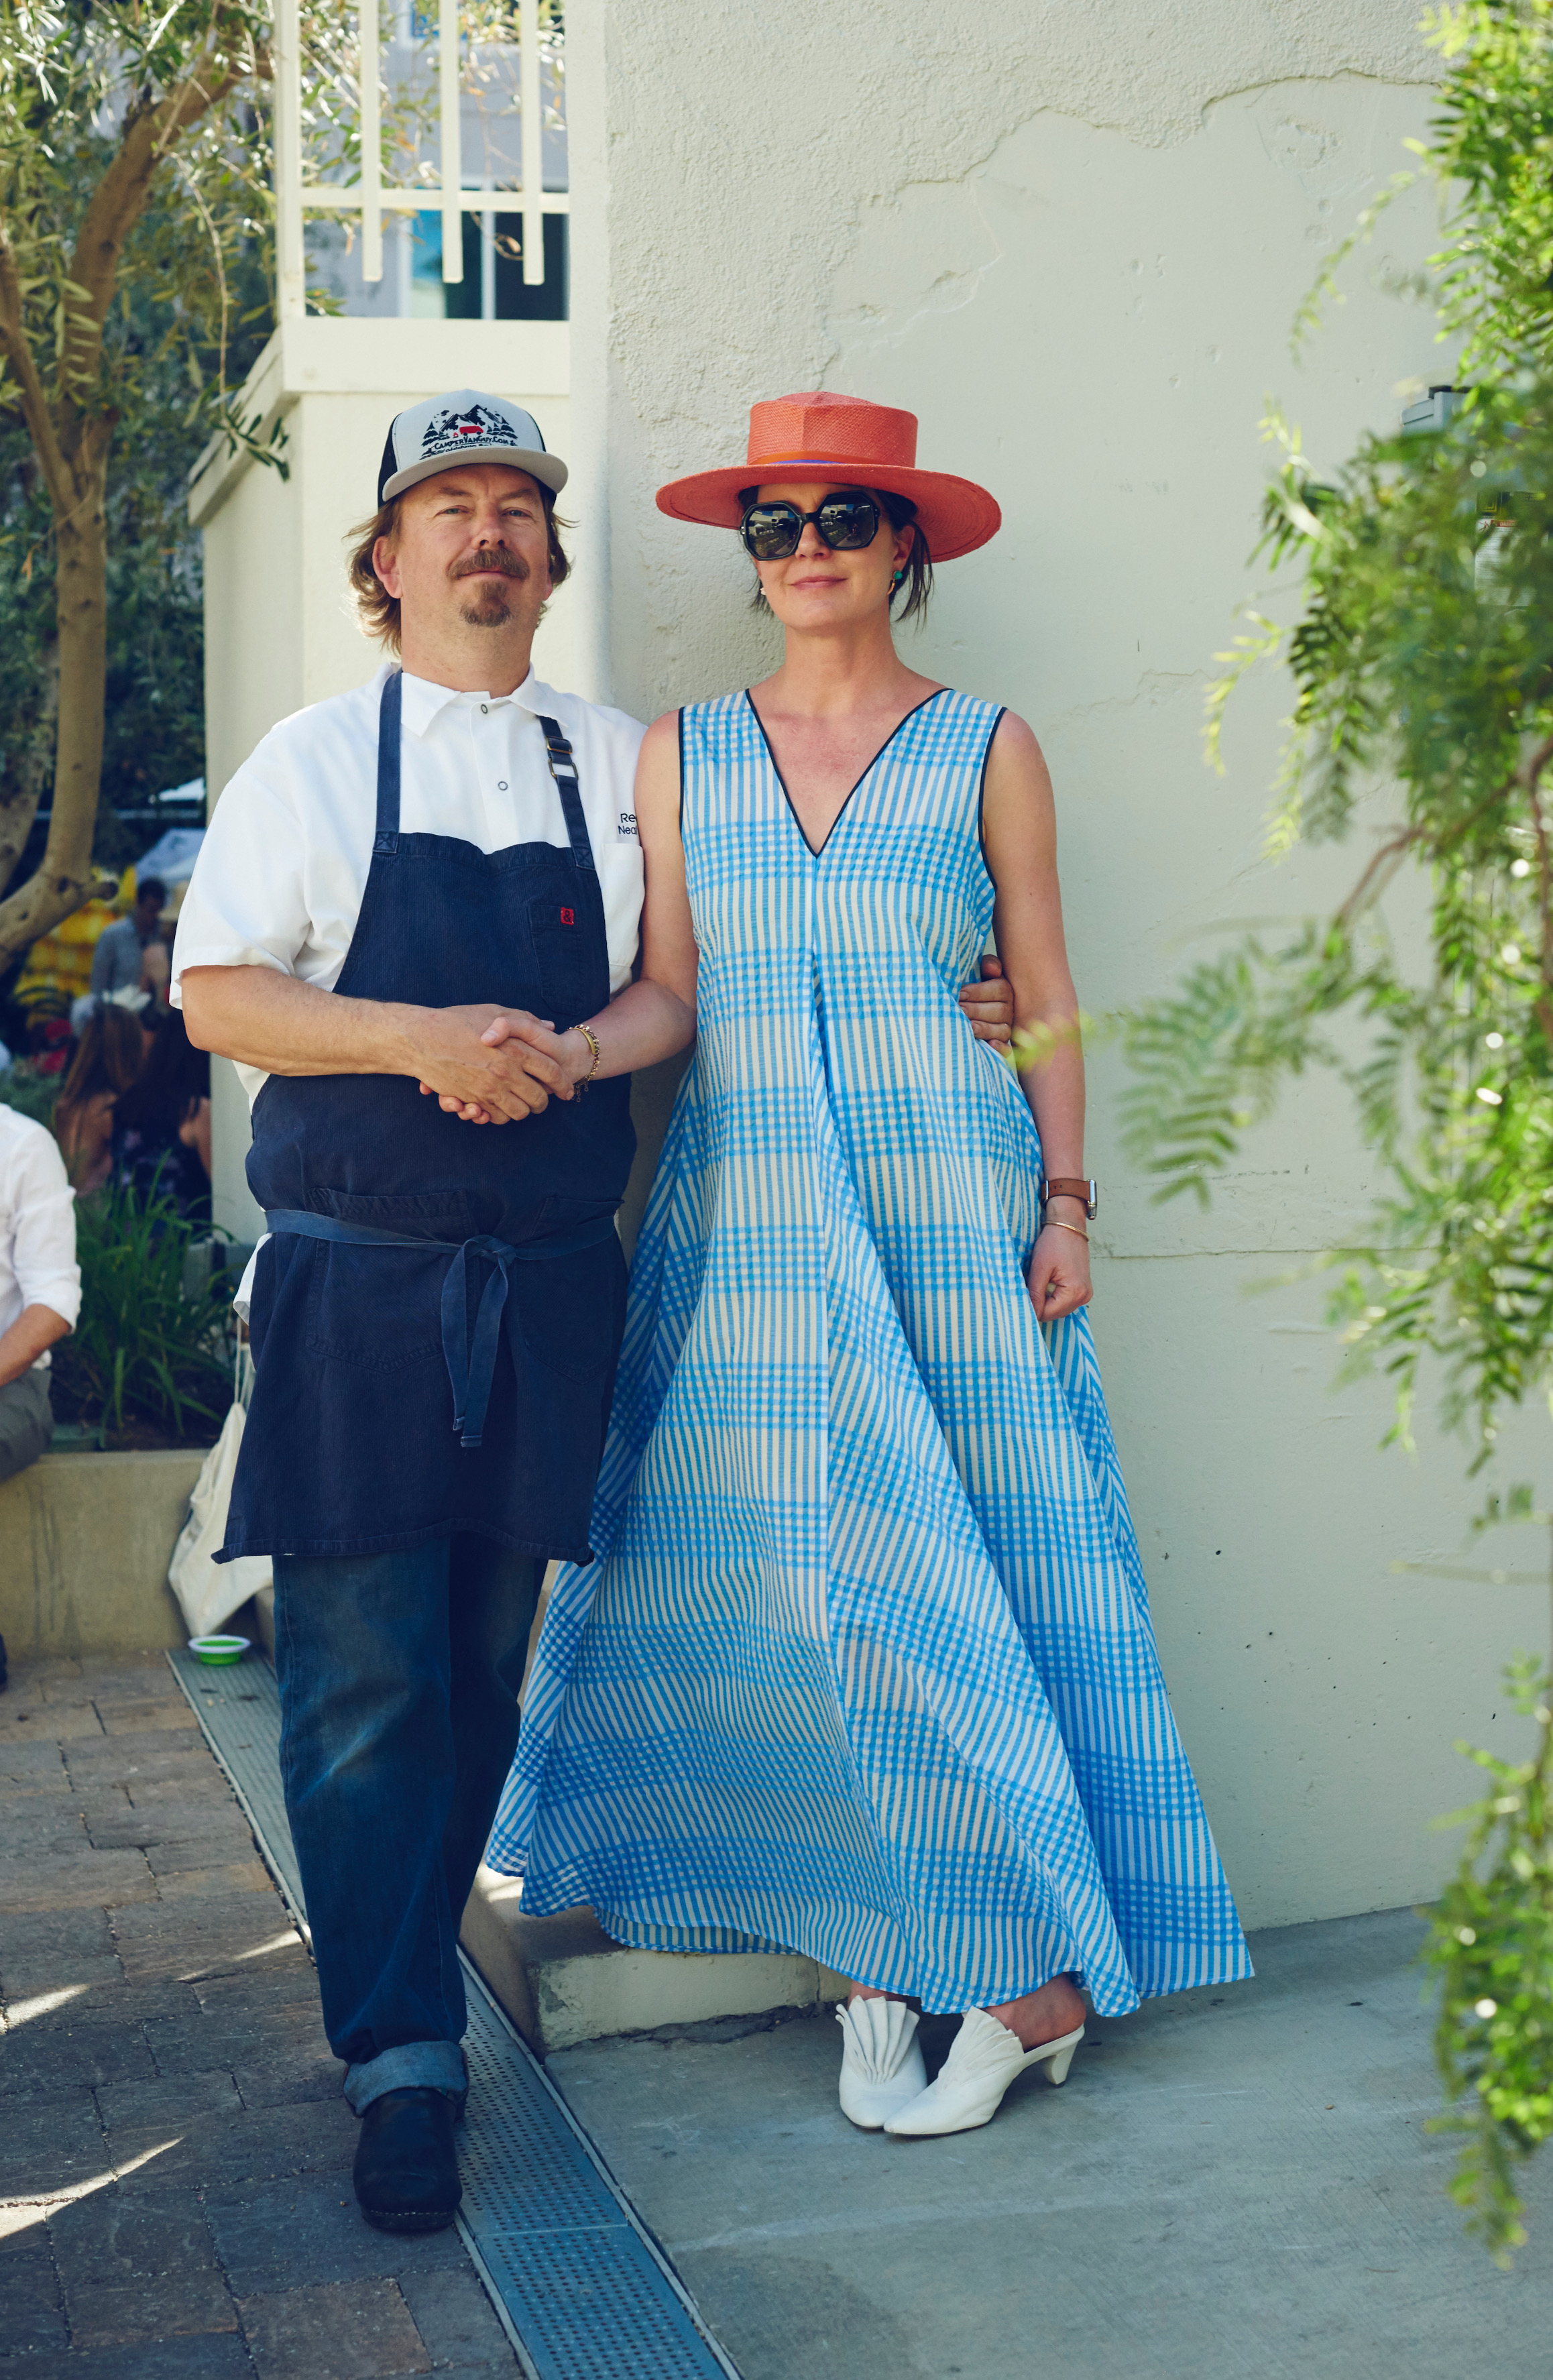 Amy Knoll Fraser in blue dress and red hat holding hands with chef in apron